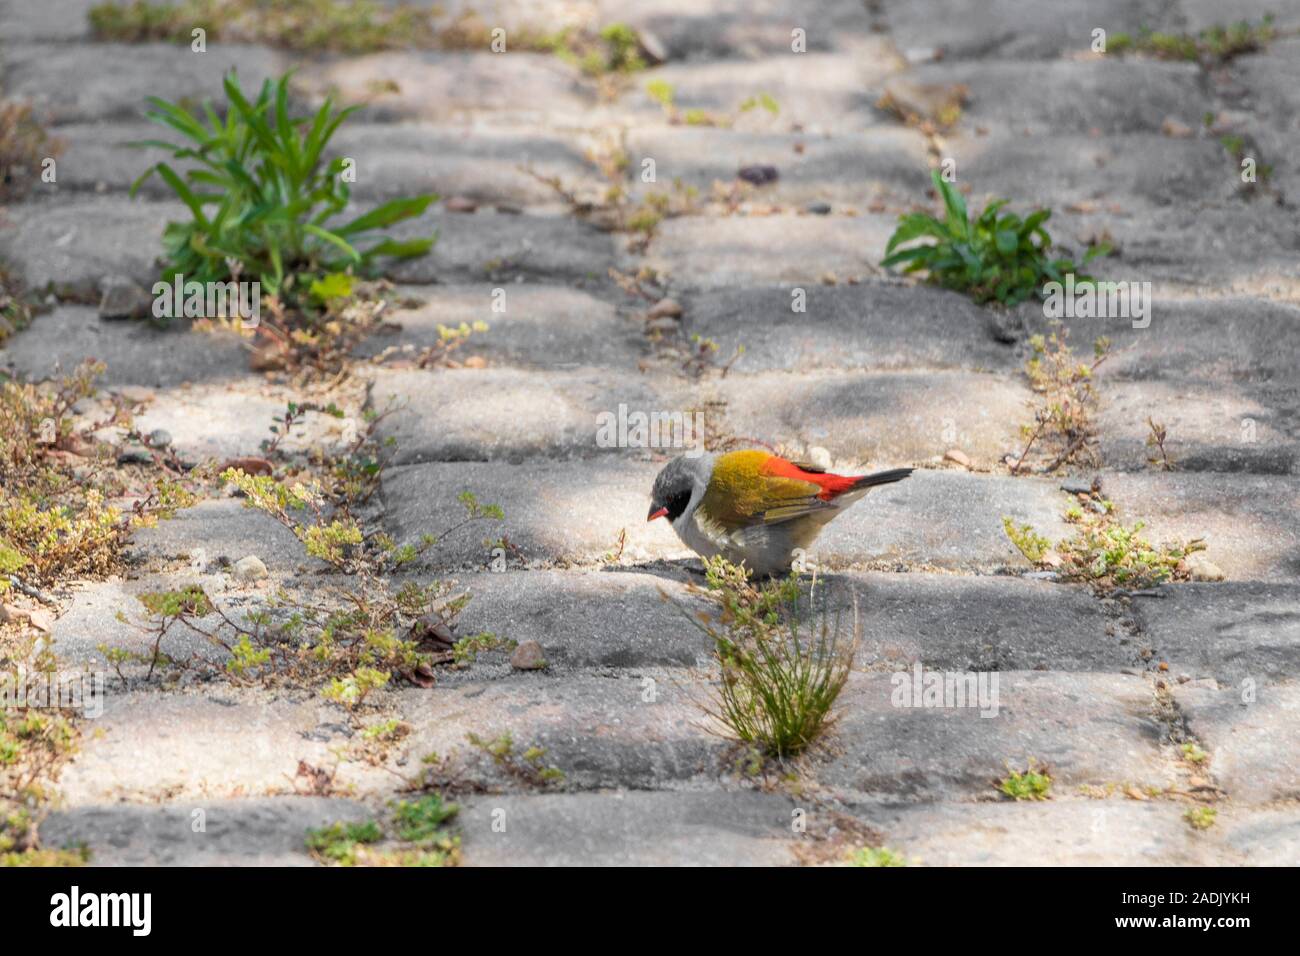 Colorful bird on ground in Cape Town, South Africa. Stock Photo